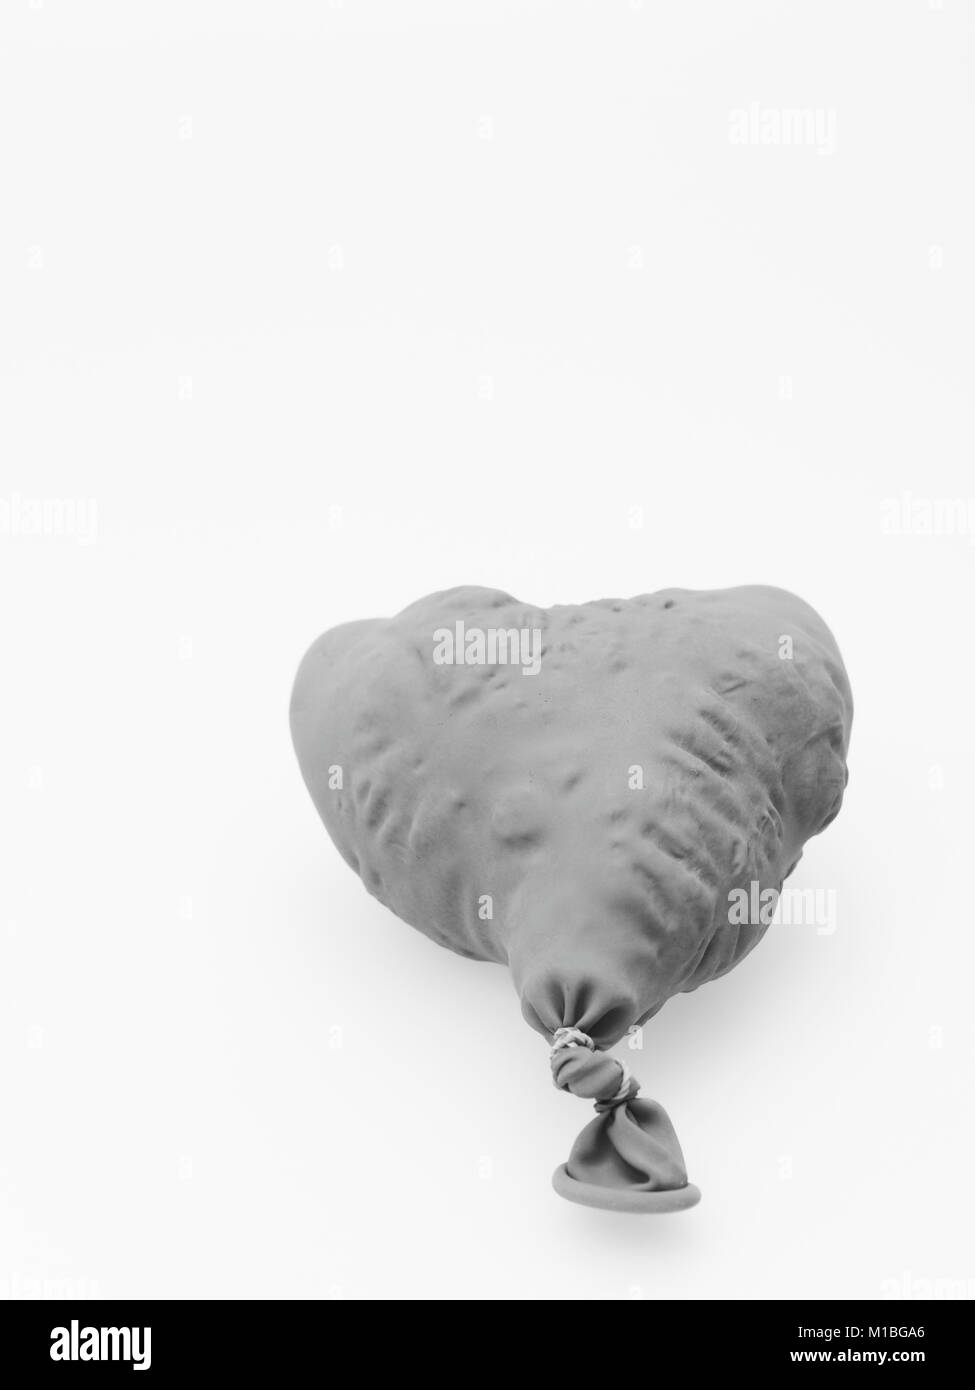 Deflate heart shape balloon in black and white isolated on white background Stock Photo